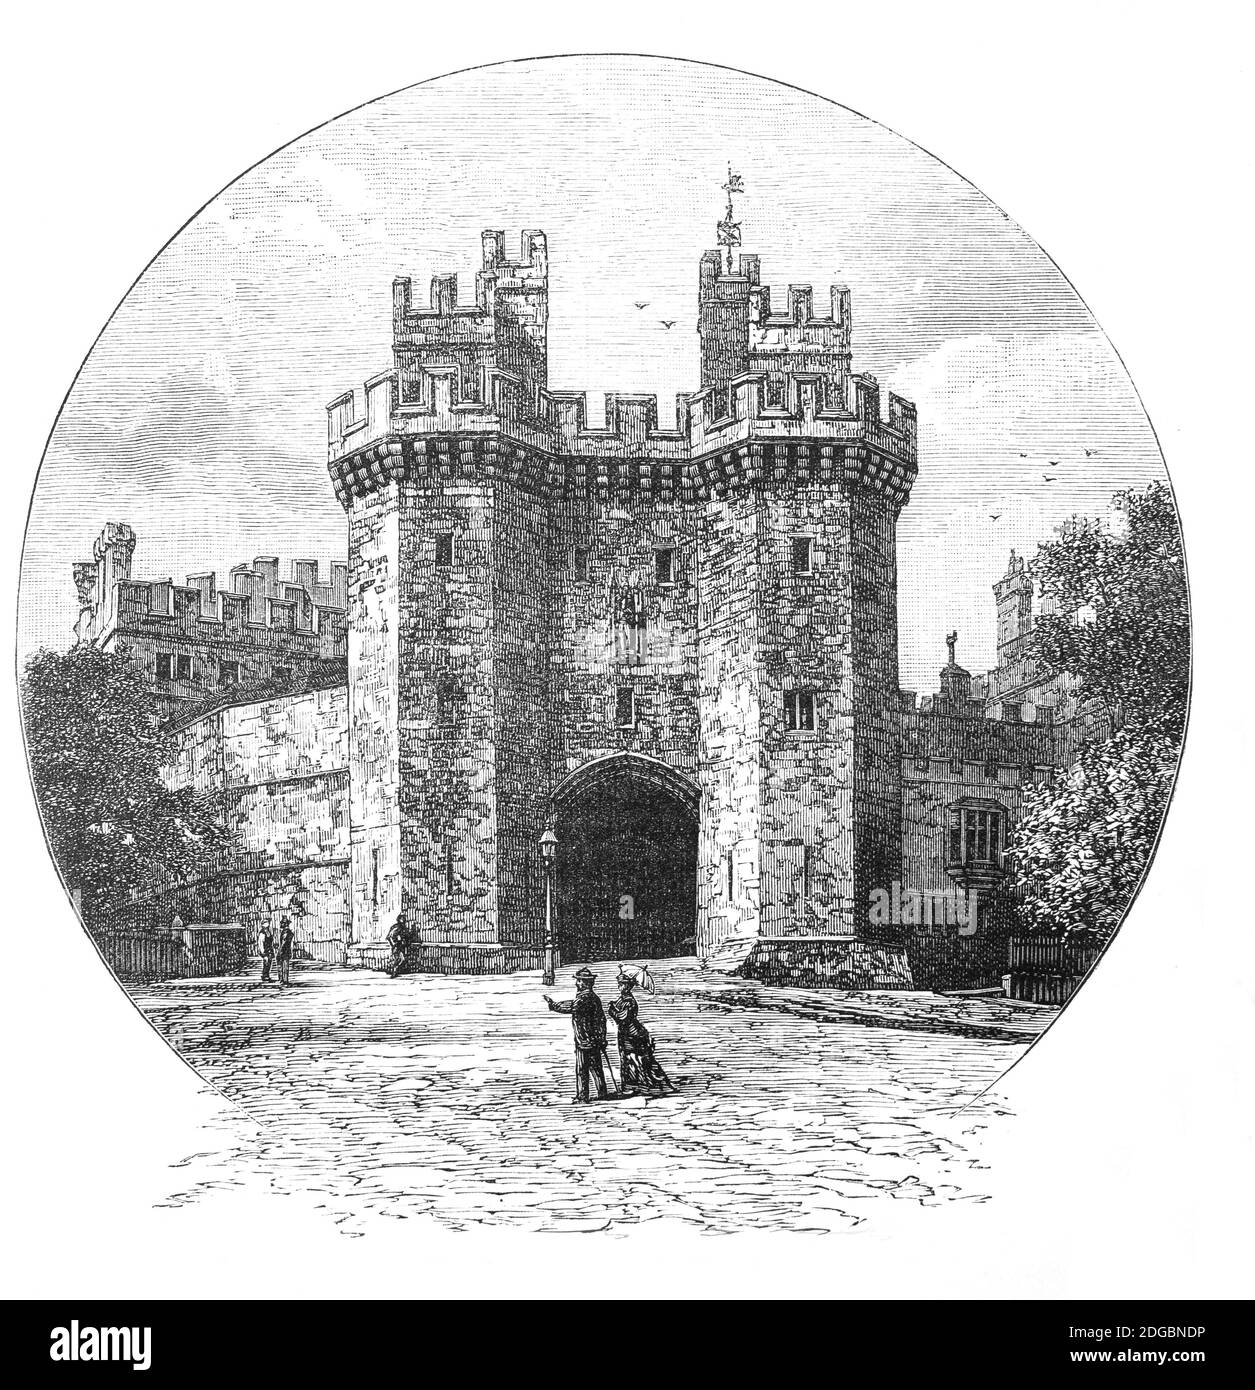 A late 19th Century view of the gateway to medieval Lancaster Castle, circa 1090, Lancashire, England. In the 14th Century, the Scots invaded England and damaged the castle. It was not to see military action again until the English Civil War when Parliamentarians captured the castle in 1643. It remained under Parliamentarian control until the end of the war. In 1648 the town withstood a siege from the Royalist Duke of Hamilton; when King Charles was executed in 1649 Parliament again ordered the dismantling of the castle, apart from administative buildings and use as a county gaol. Stock Photo